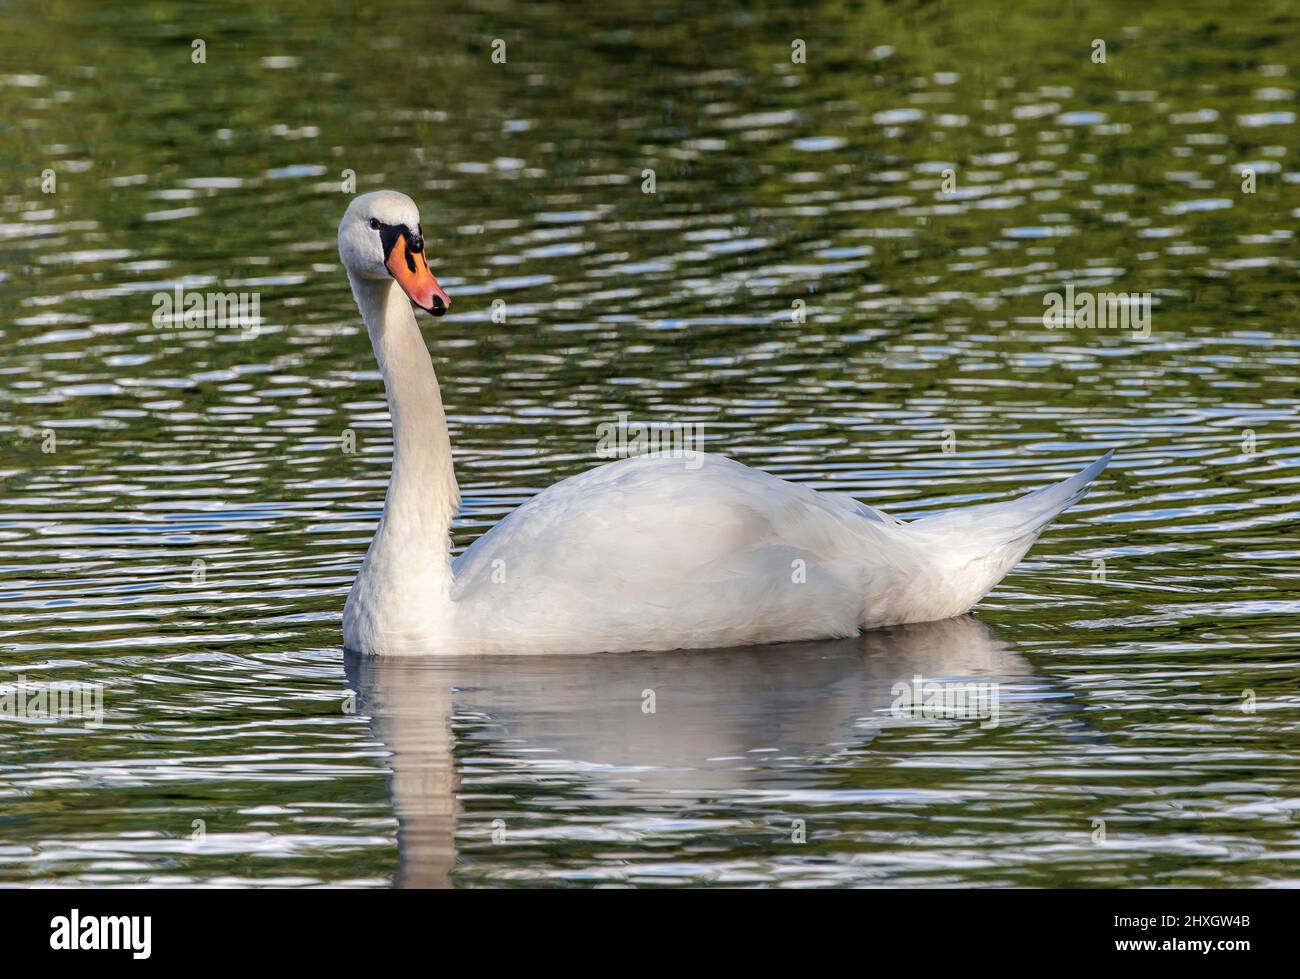 A Mute Swan with a long, outstretched neck, swimming in a green water lake. Stock Photo